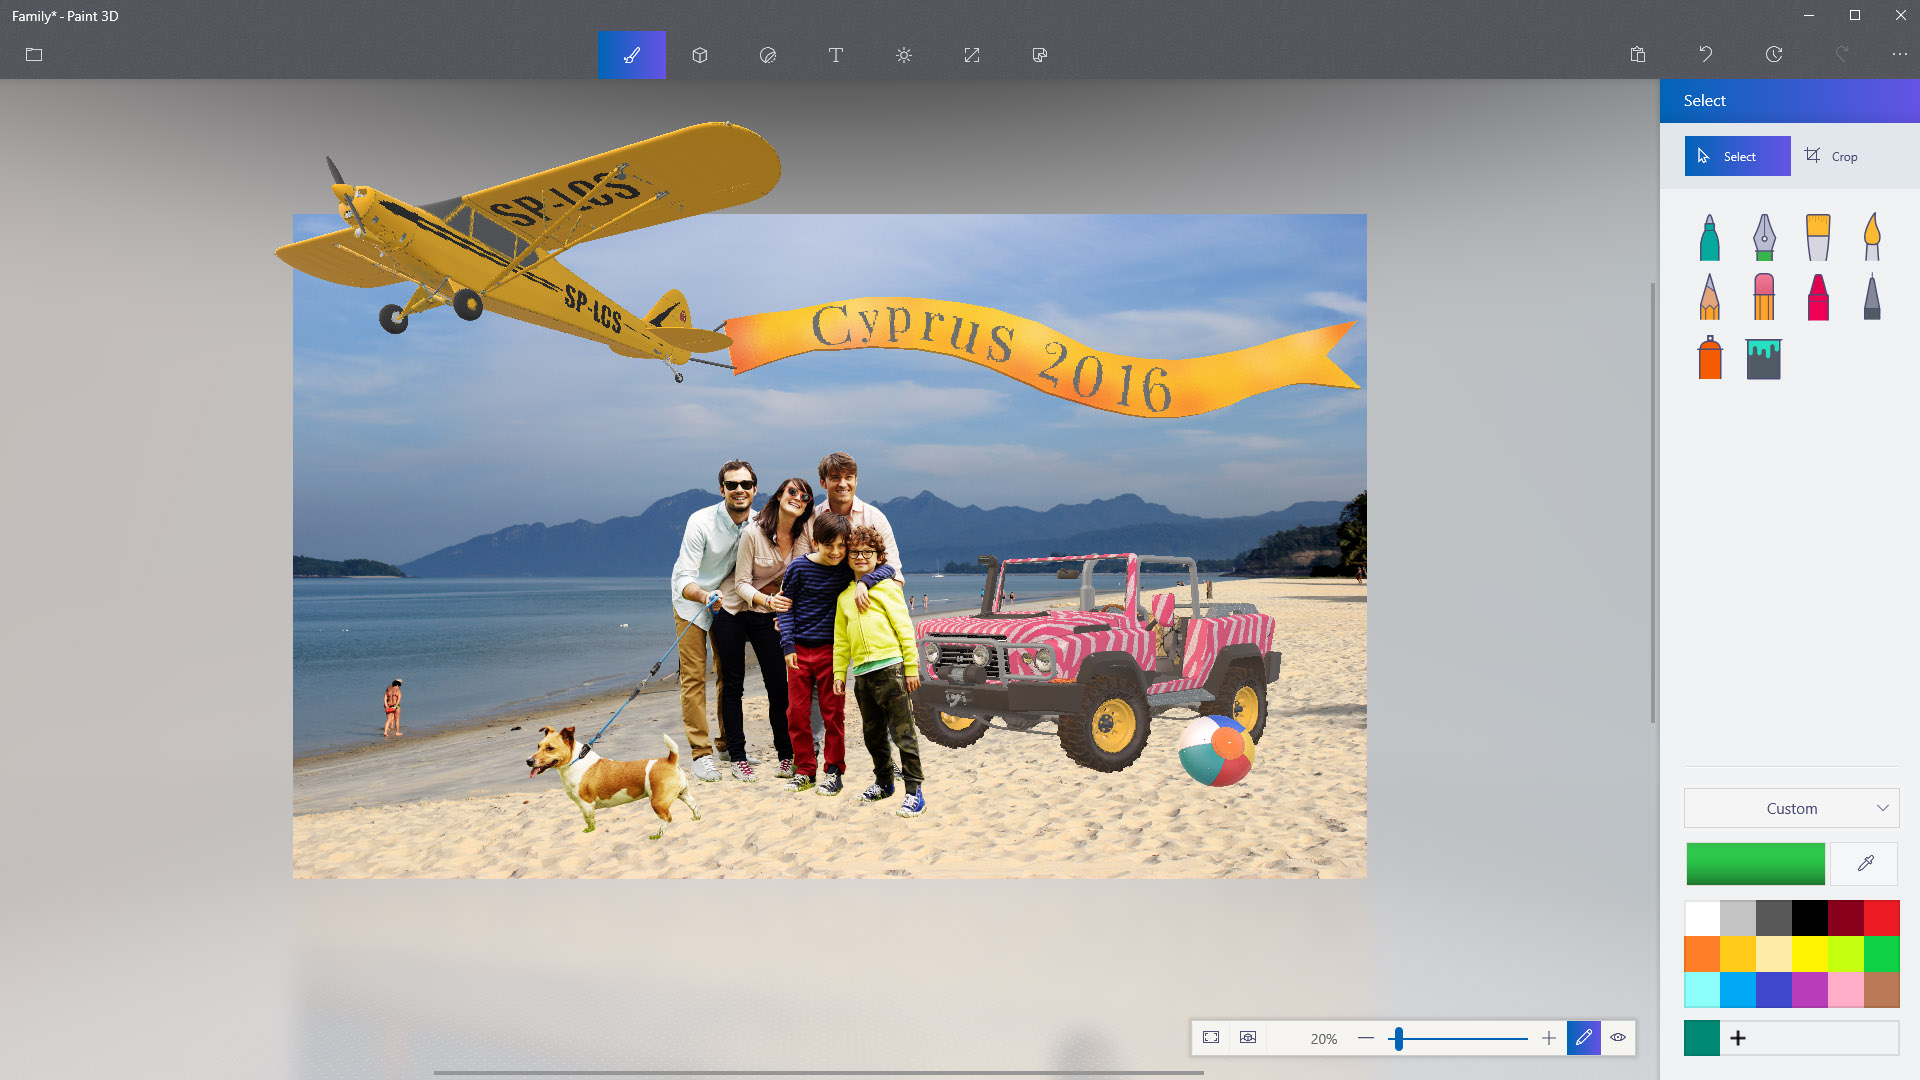 Family photo being cropped with Magic Select tool in Paint 3D